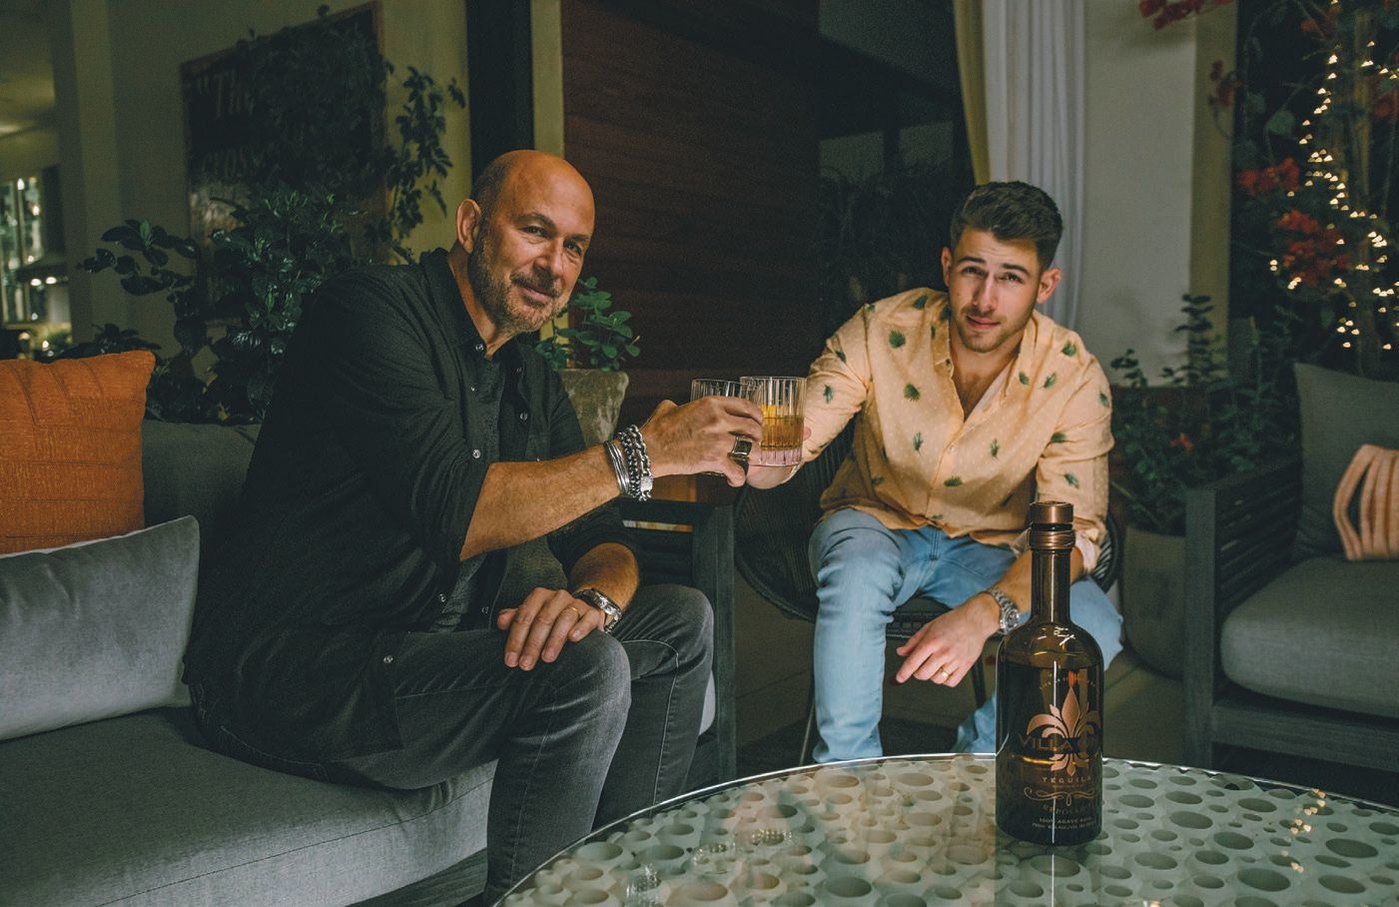 John Varvatos and Nick Jonas celebrate their latest collaboration, Villa One Tequila PHOTO COURTESY OF VILLA ONE TEQUILA